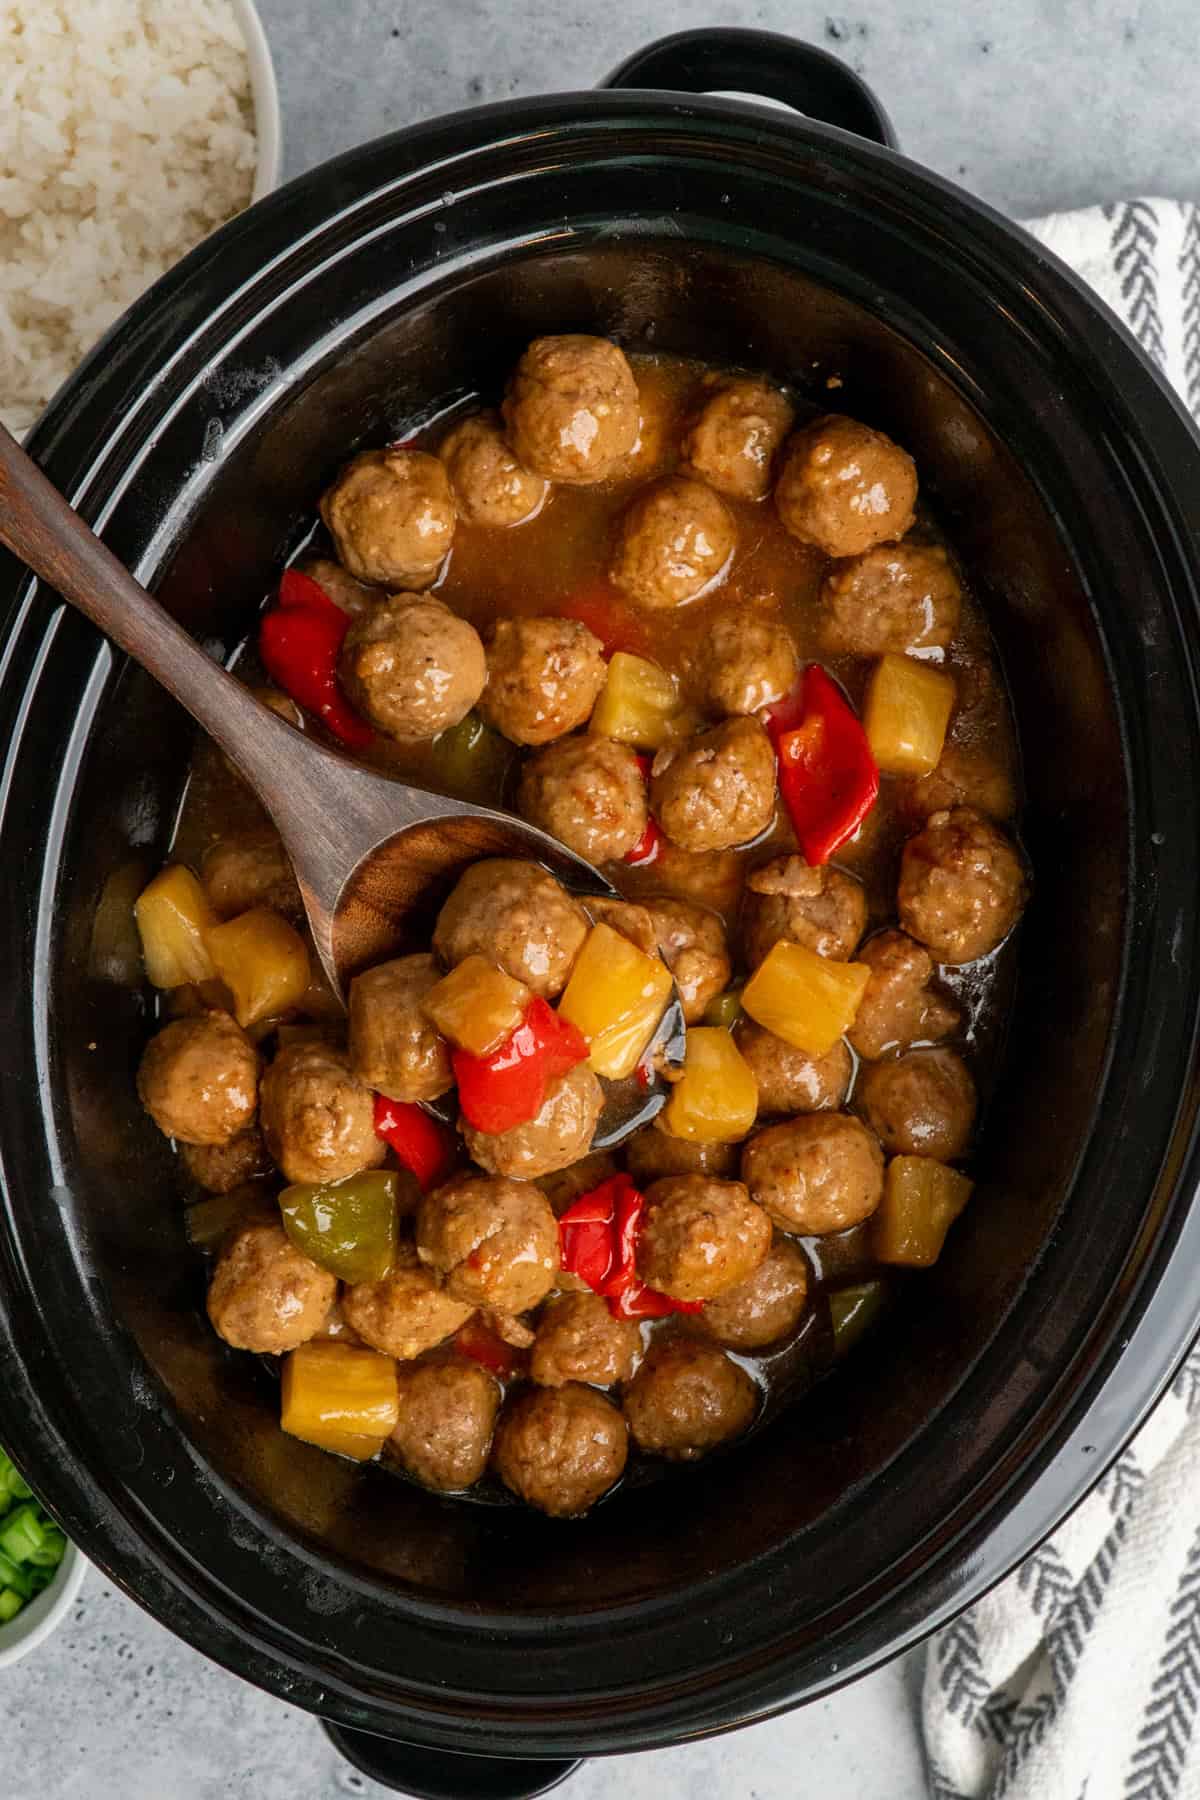 Overhead look at teriyaki meatballs in a crock pot with a wooden spoon.